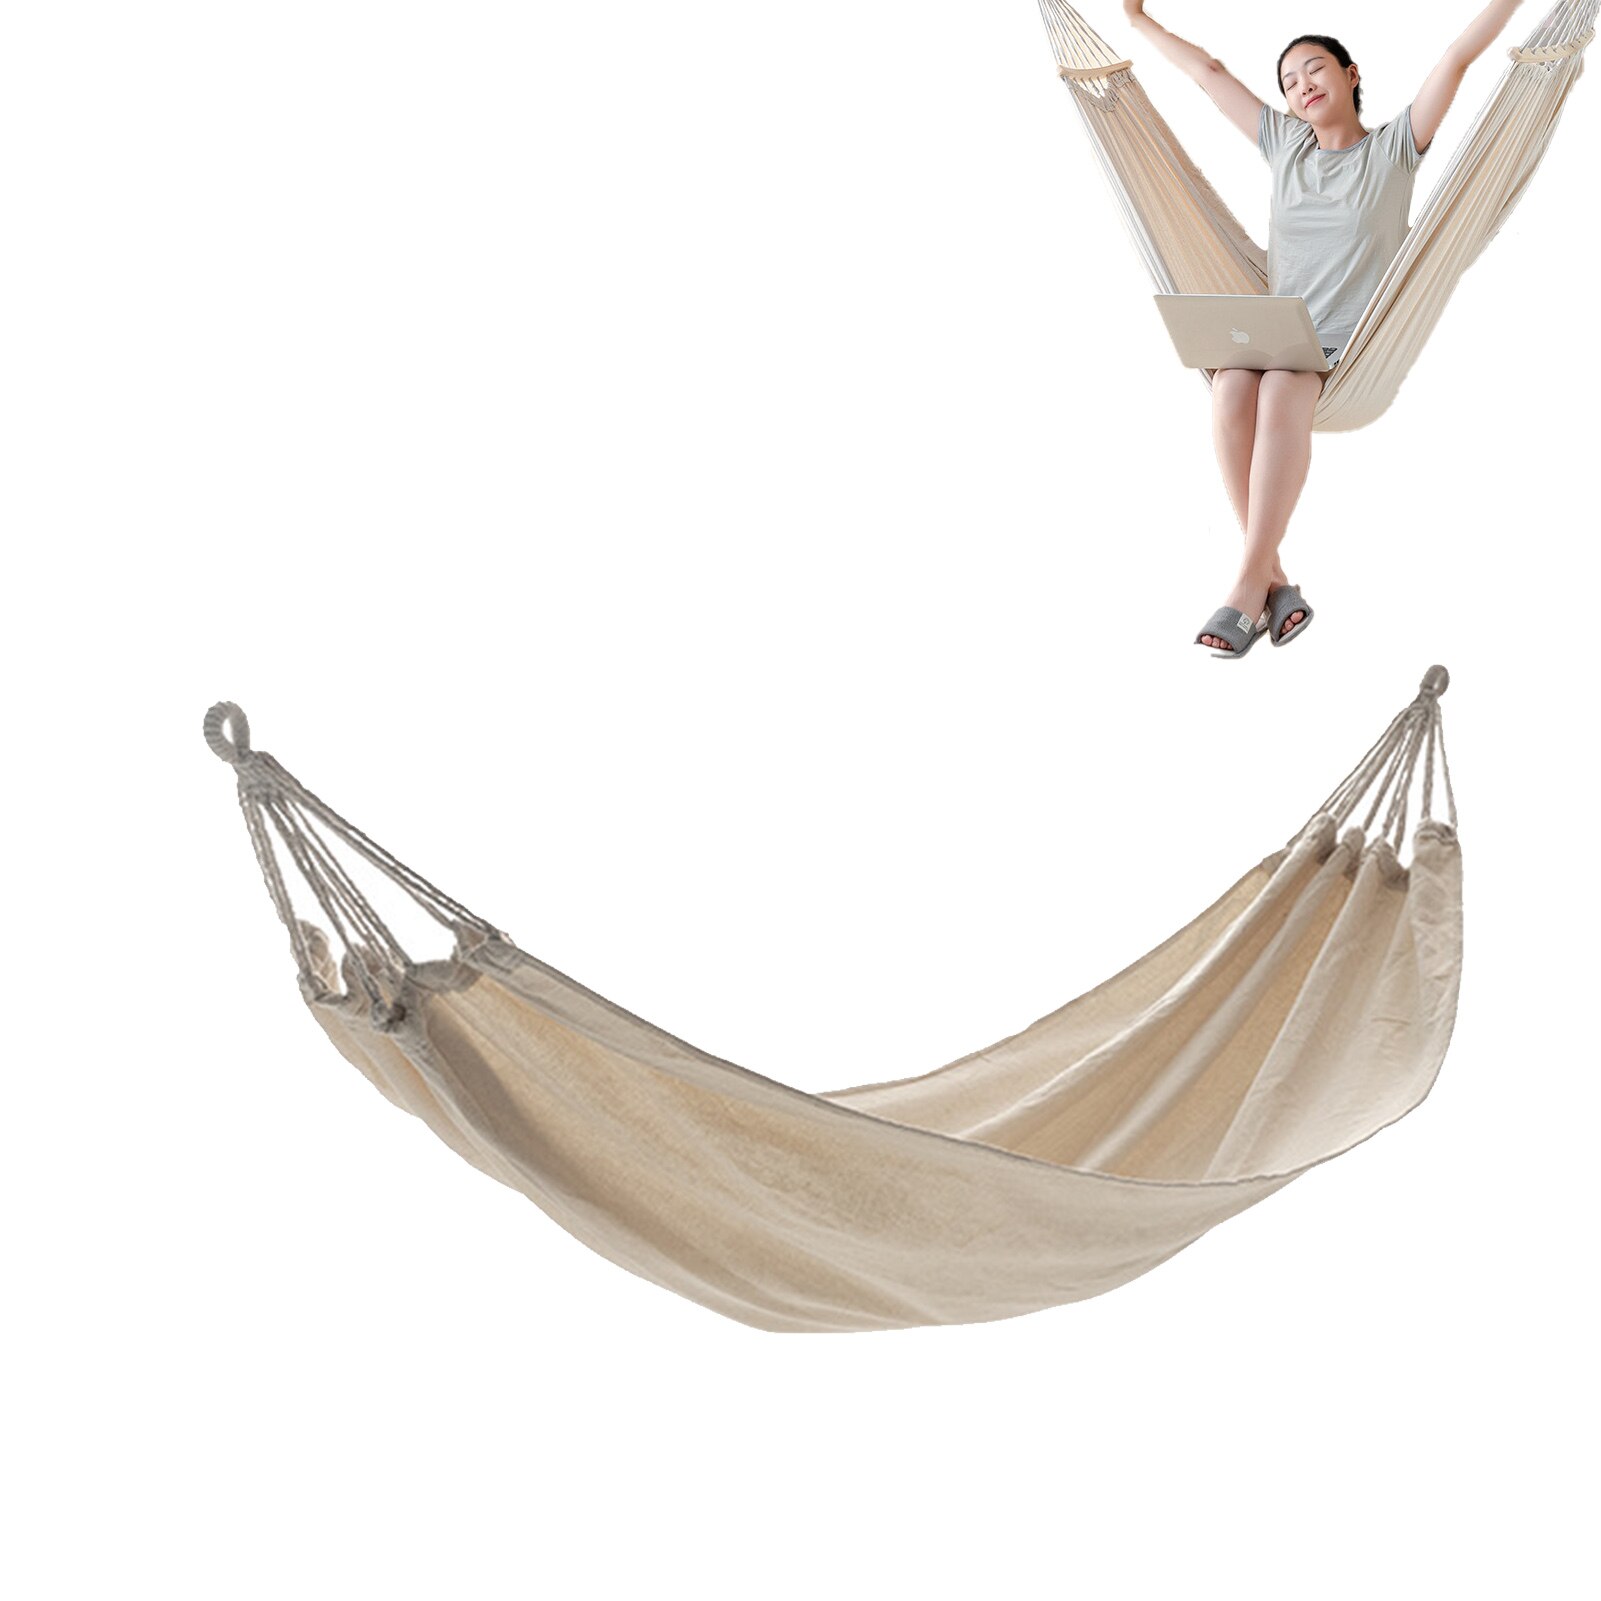 Cheap Goat Tents Garden Cotton Hammock Portable Hammock Single Or Double Hammock 2 Person Hammock With Bag Camping Accessories For Outdoor Indoor